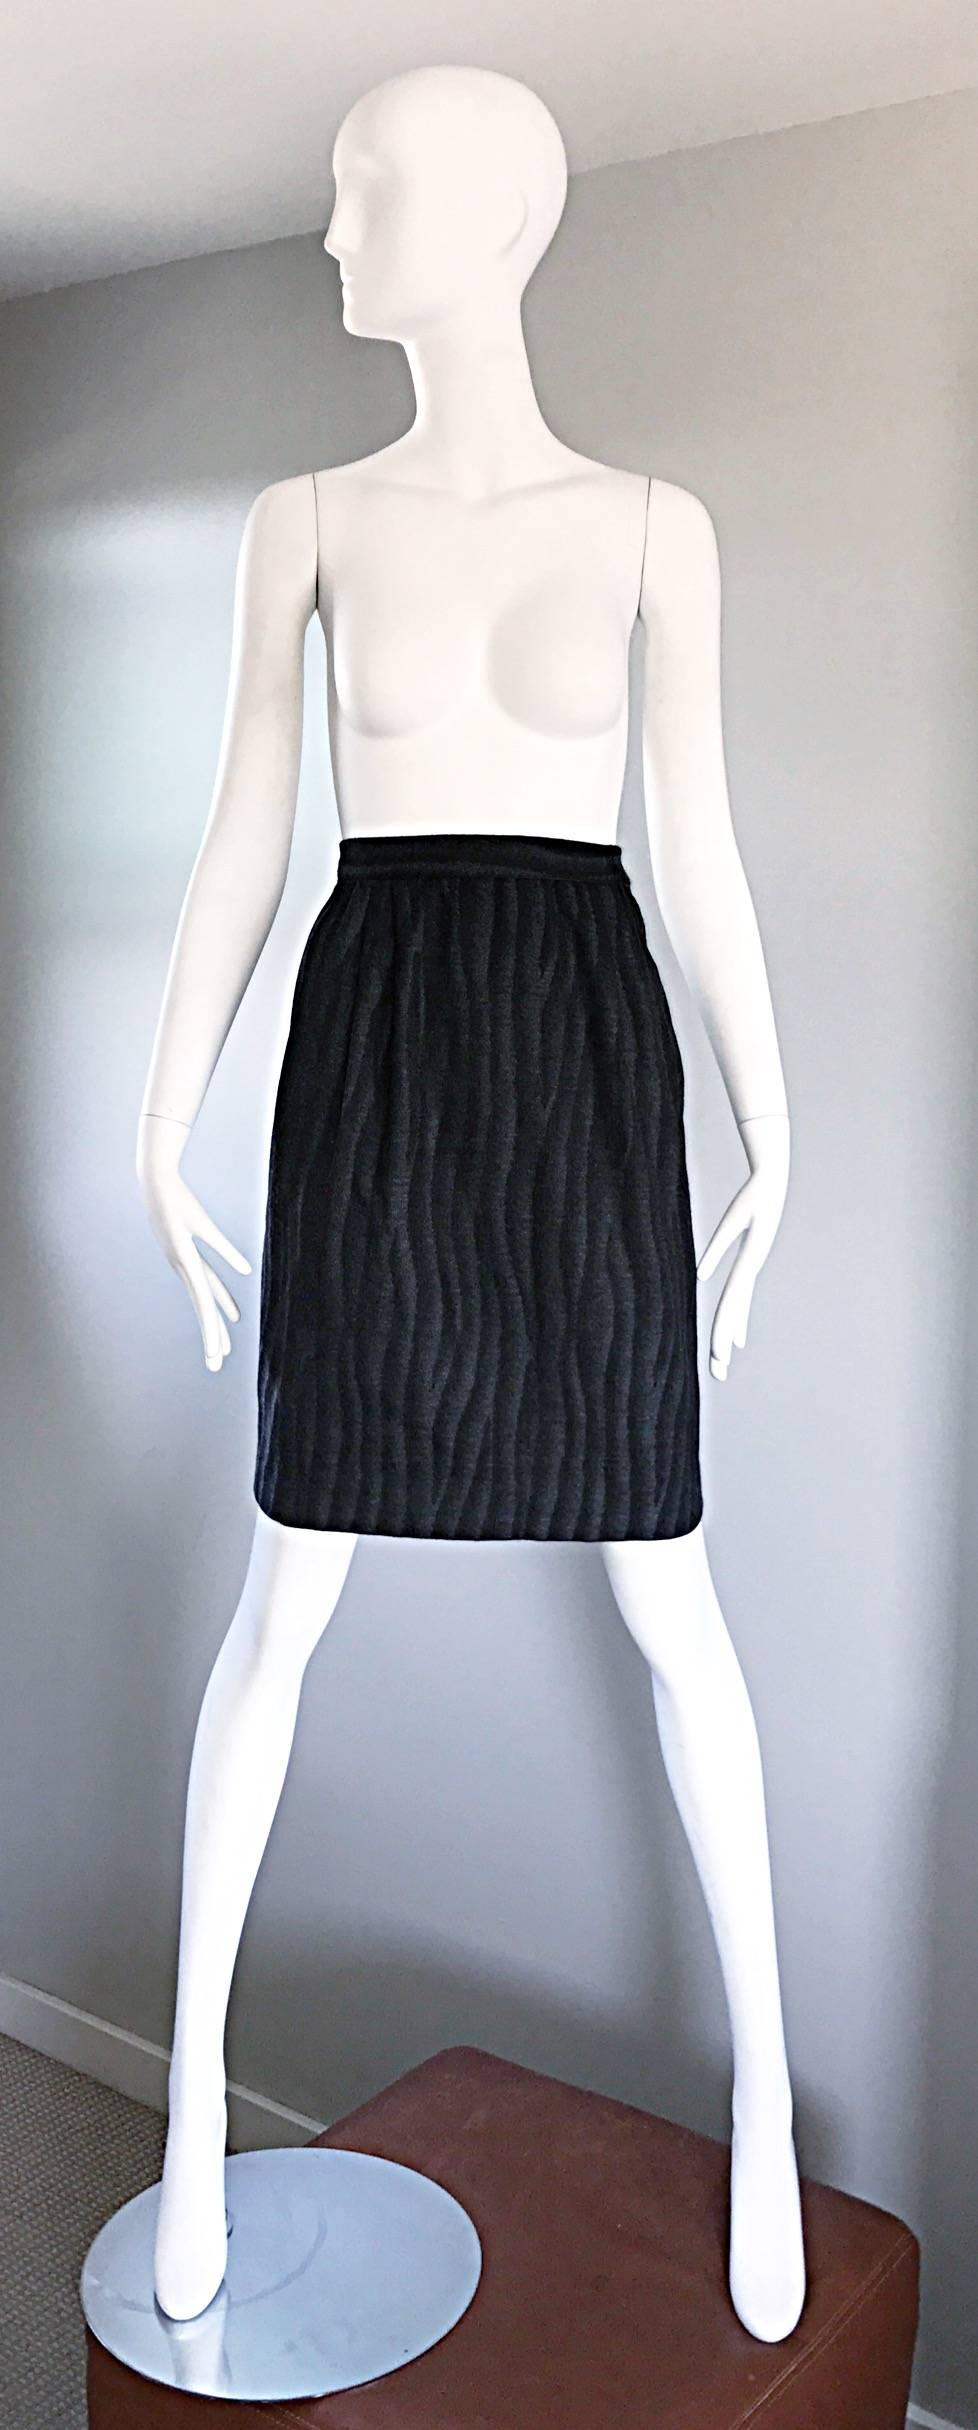 Incredible vintage 80s VALENTINO high waisted grey and black wool optical illusion 3-D skirt! Amazing flattering print and fit. Hidden zipper up the side, with button closure. Fully lined. In great condition. Made in Italy.
Approximately Size